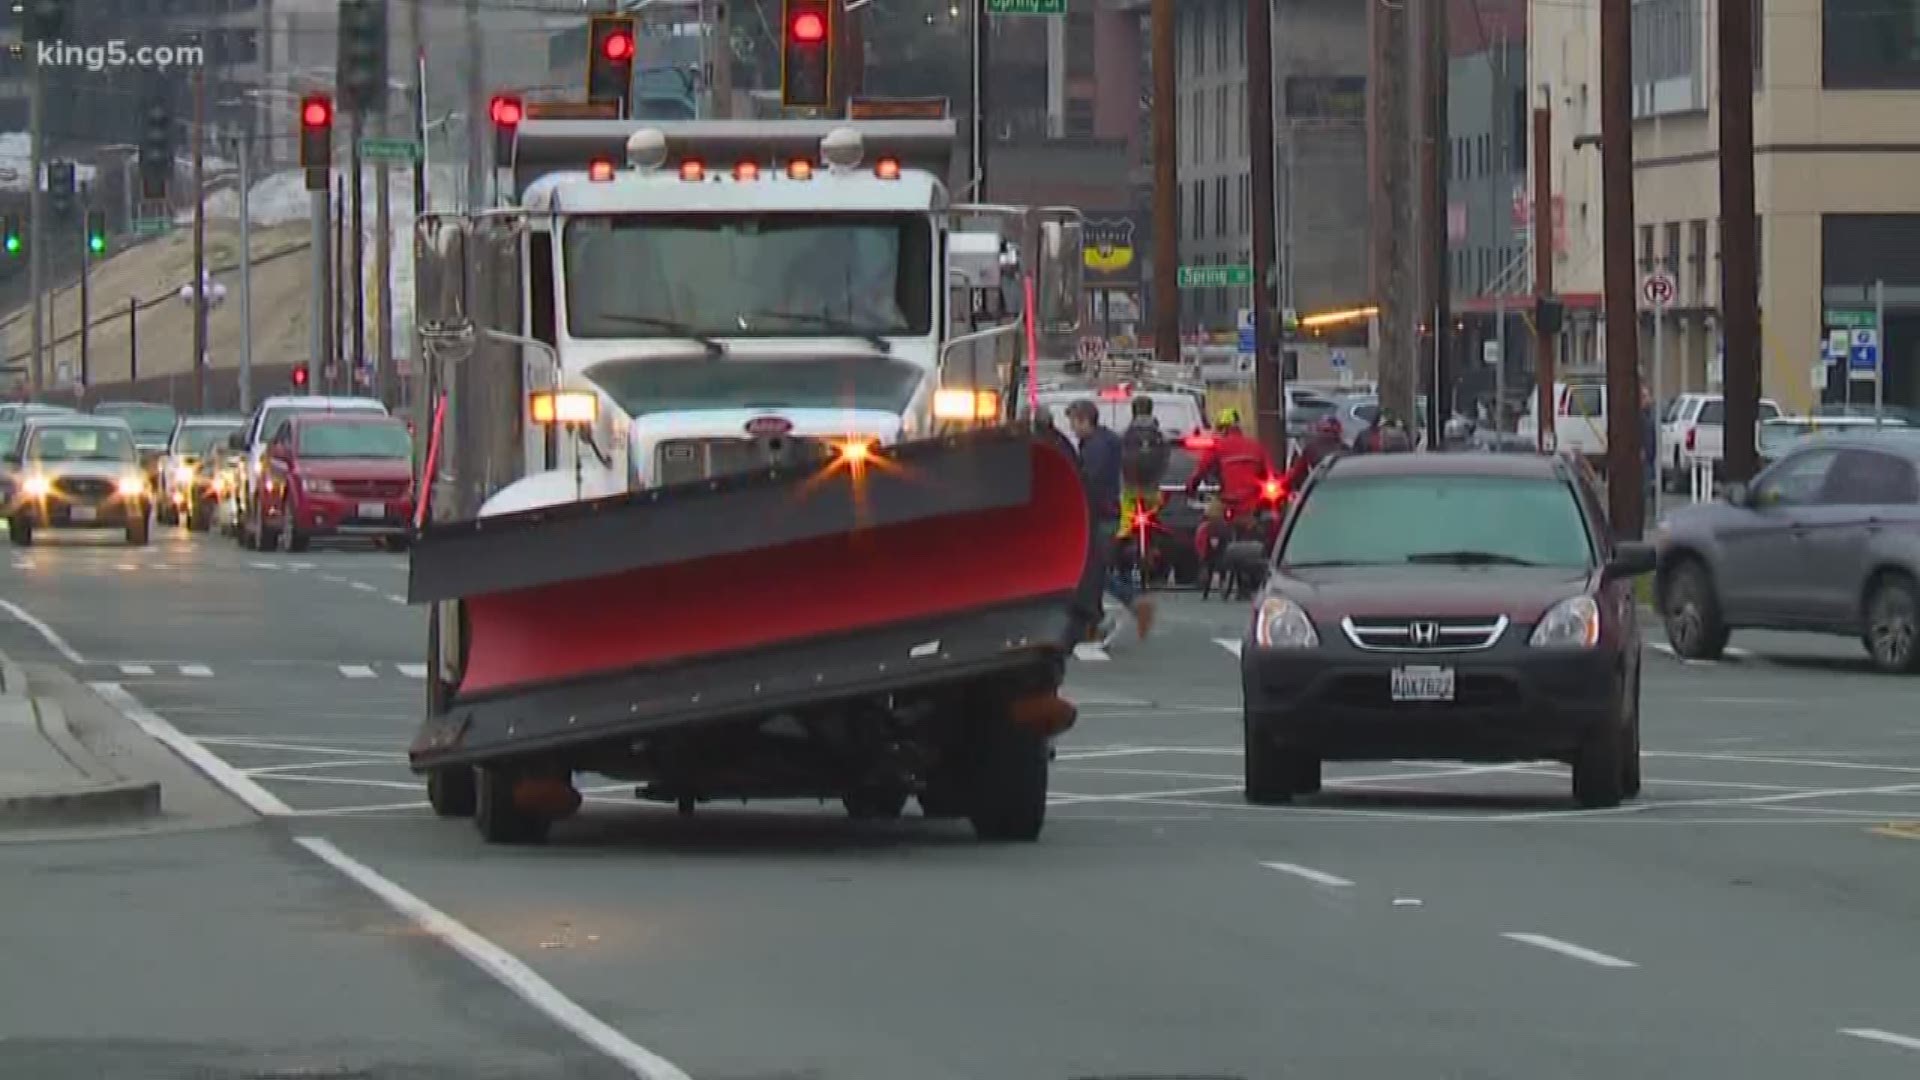 After record-breaking snowfall in western Washington last season, the city of Seattle is preparing for this winter with extra equipment and crews.